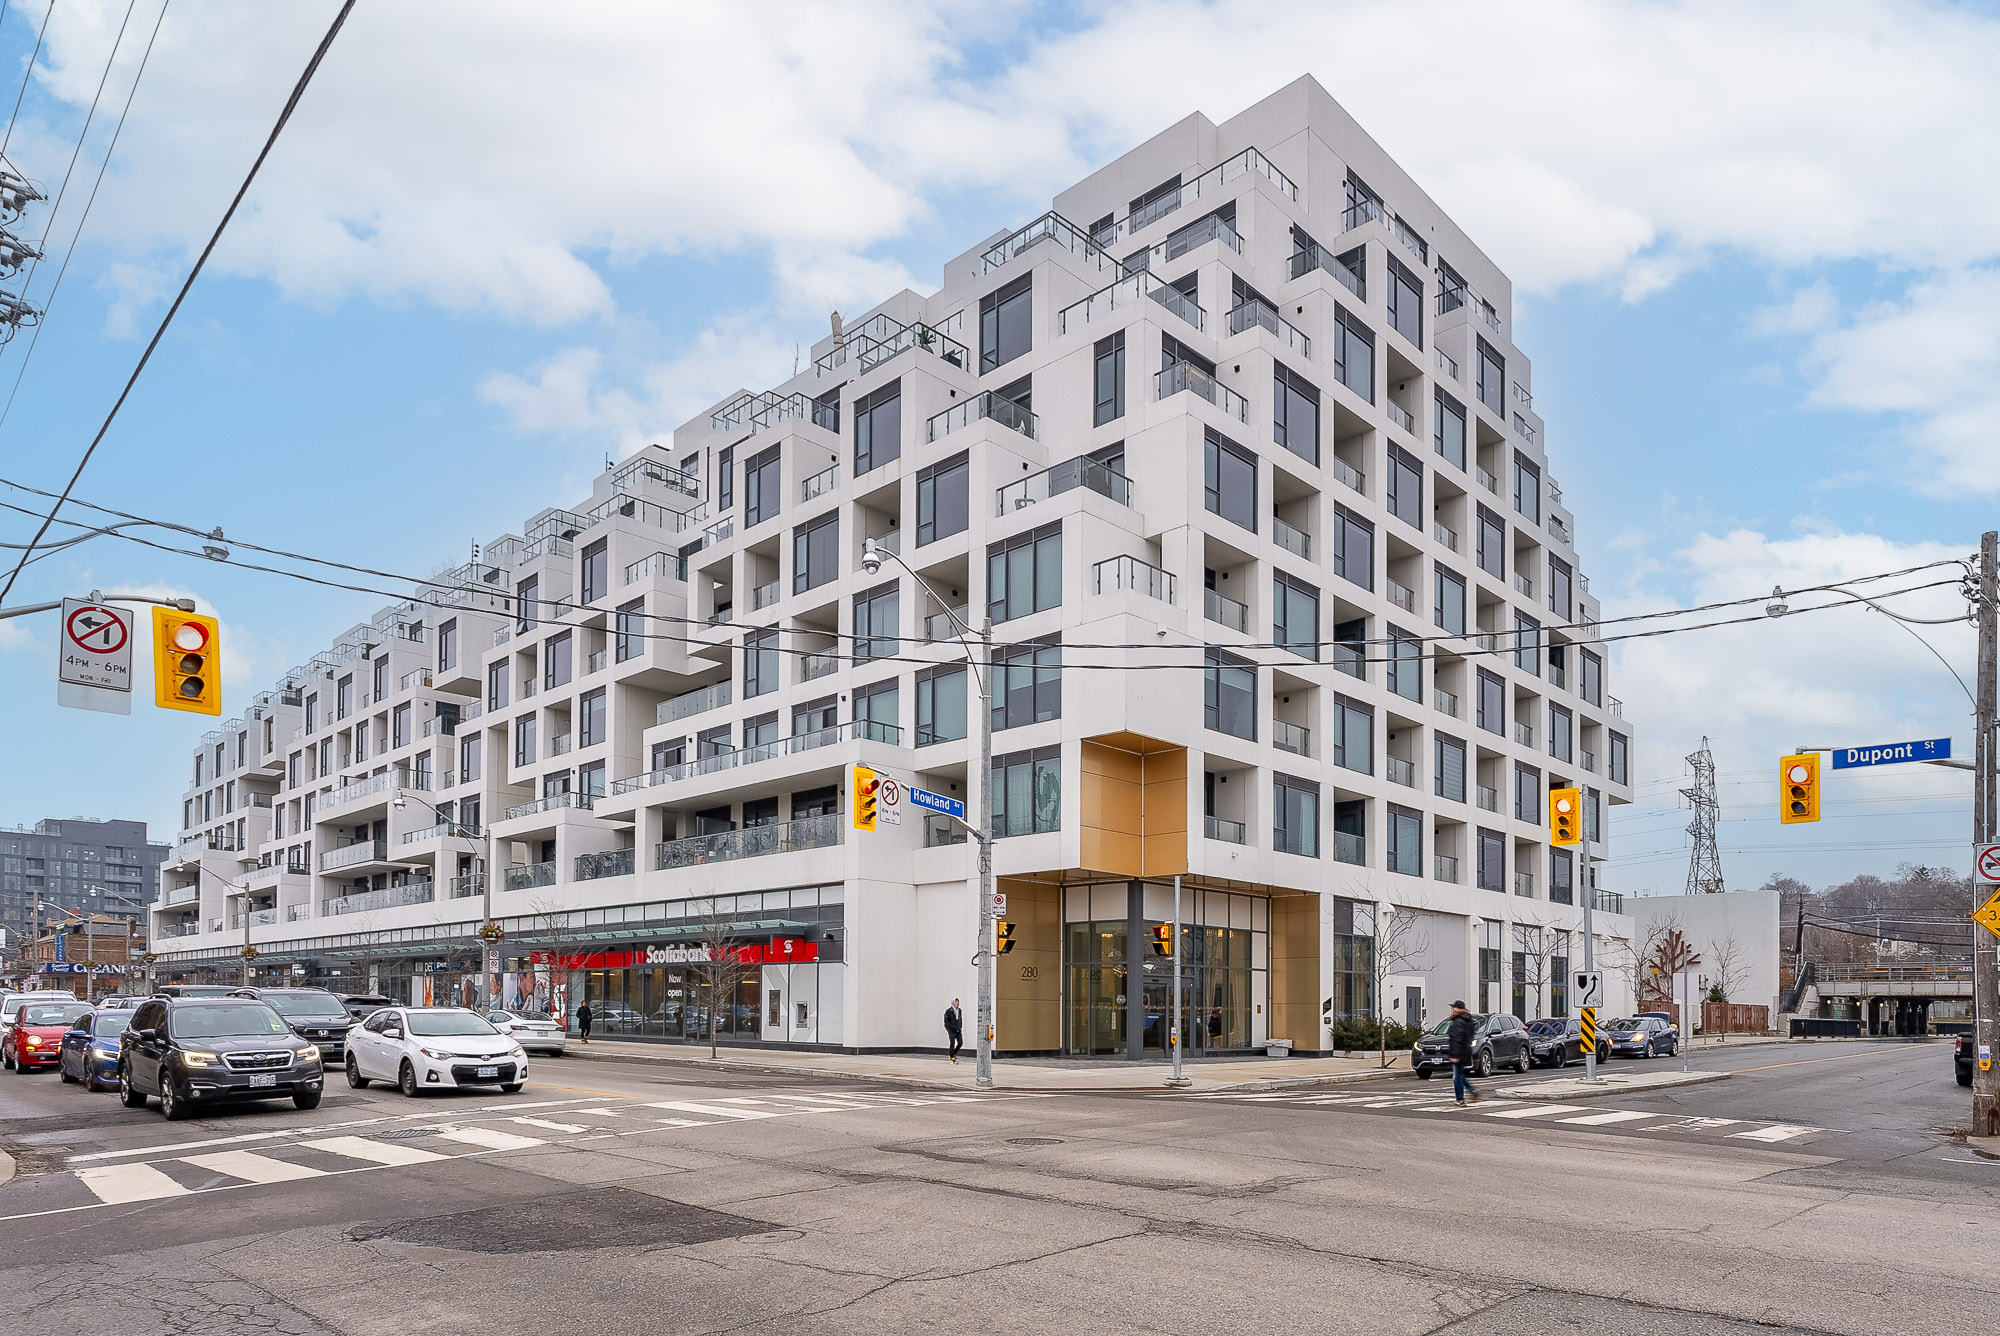 Buttonwood Property Management And Rental Services Is Pleased To Offer A 1 Bedroom 1 Bathroom Condo For Rent Located At 280 Howland Avenue Toronto Ontario M5R 0C3